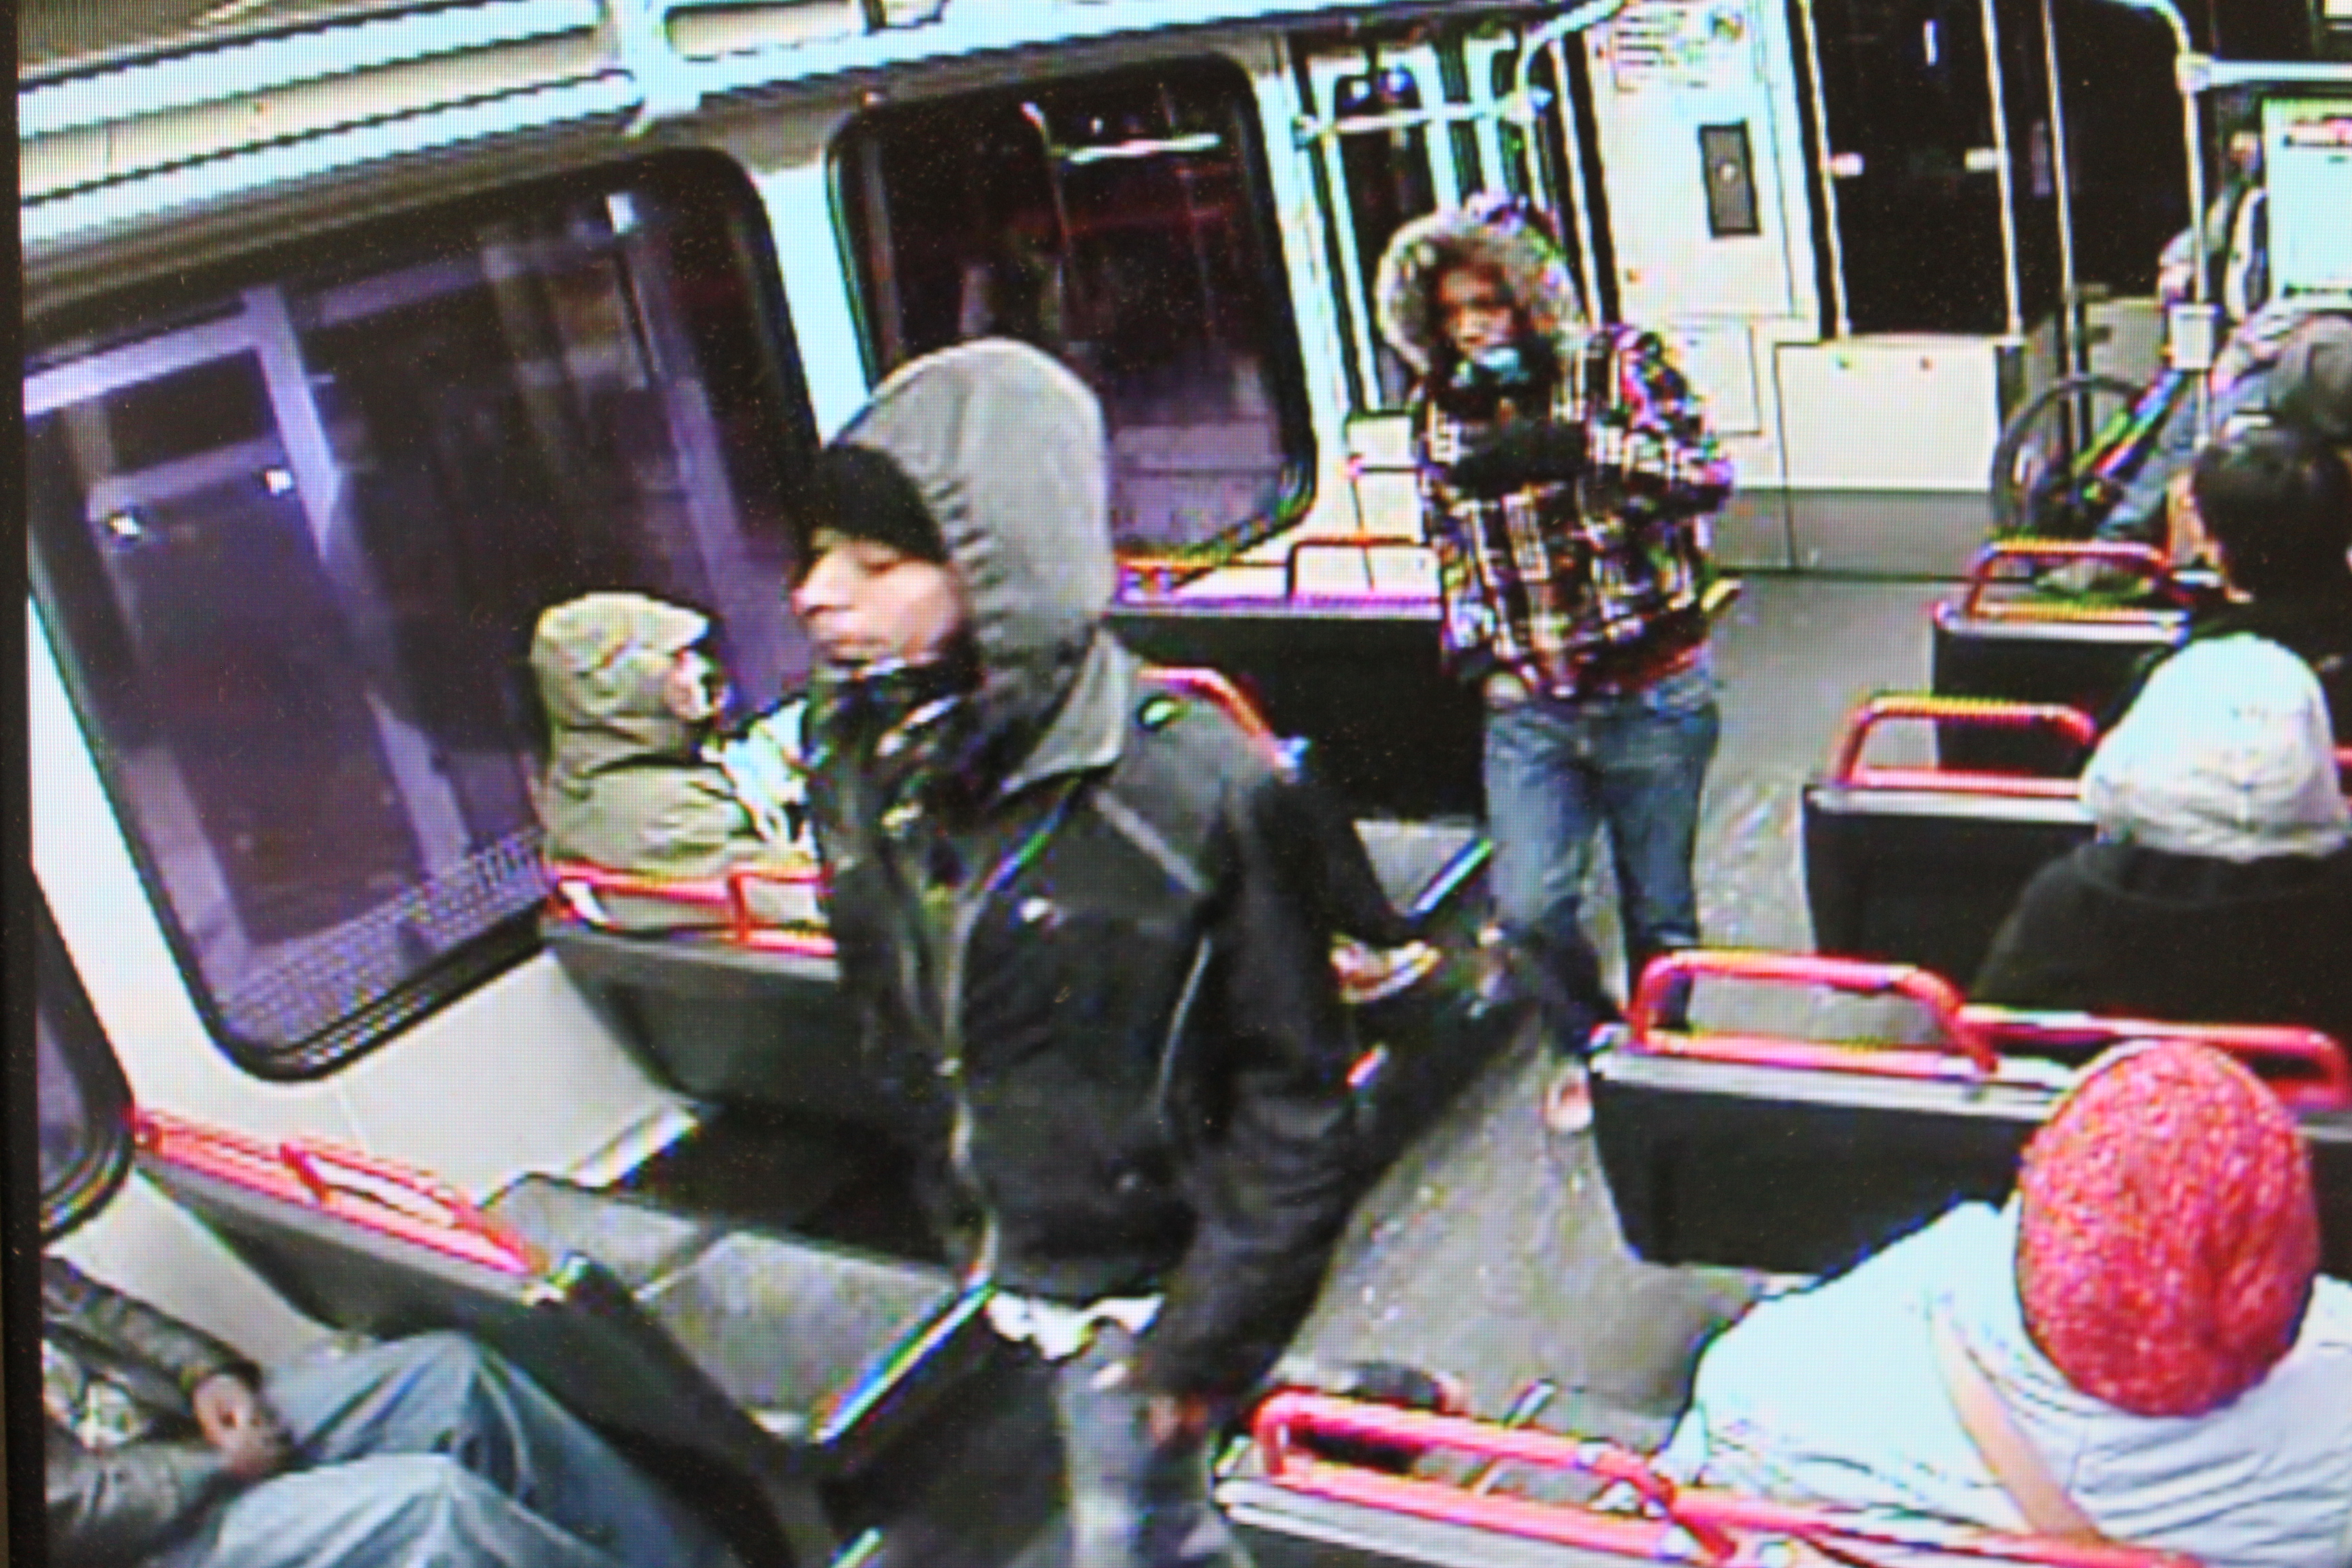 Police: Nov. 27 Metrolink robbery suspects from St. Louis area